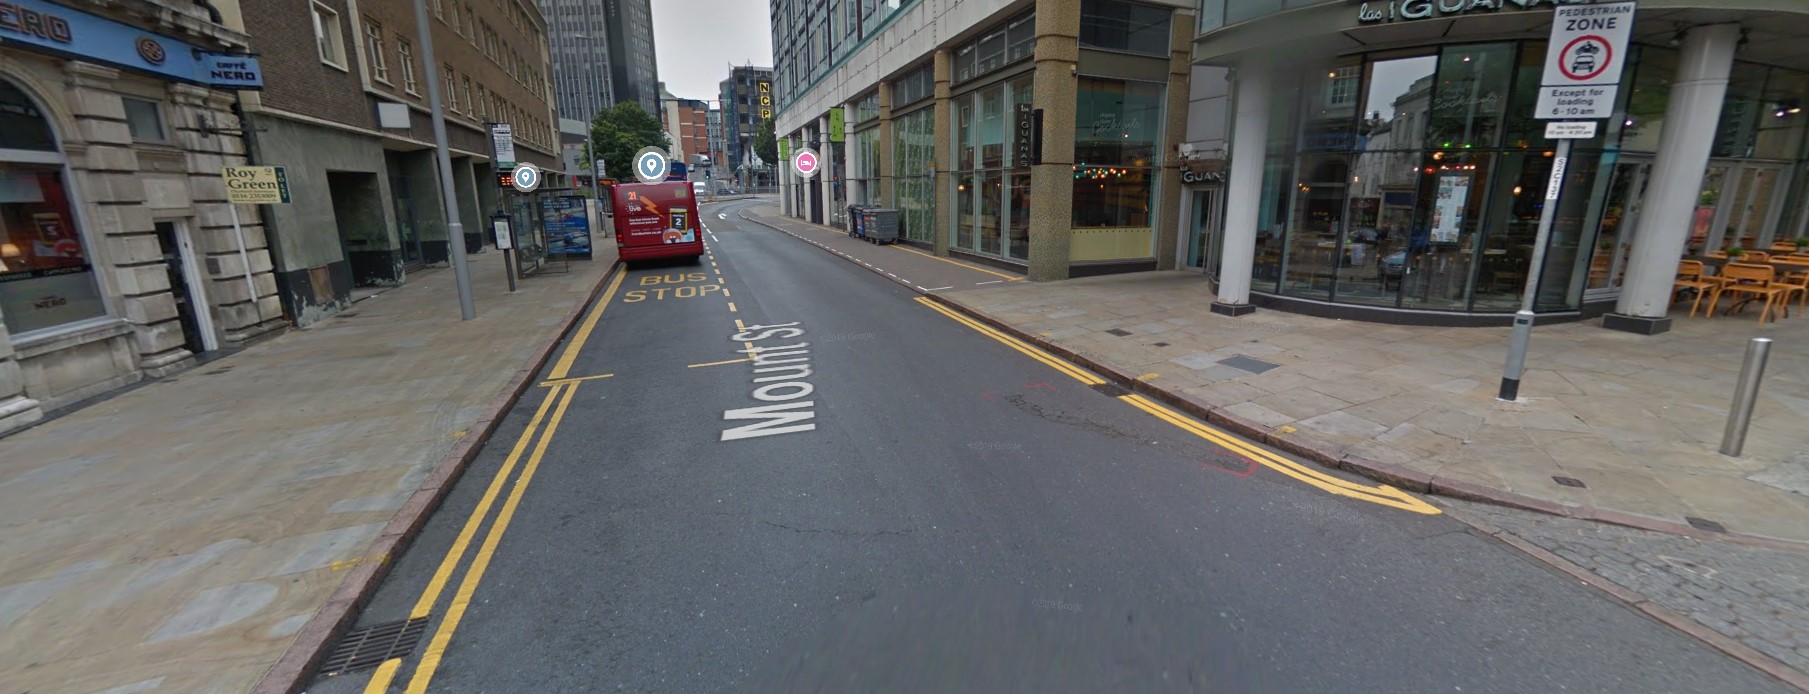 Driver angered over fine for parking in bus bay